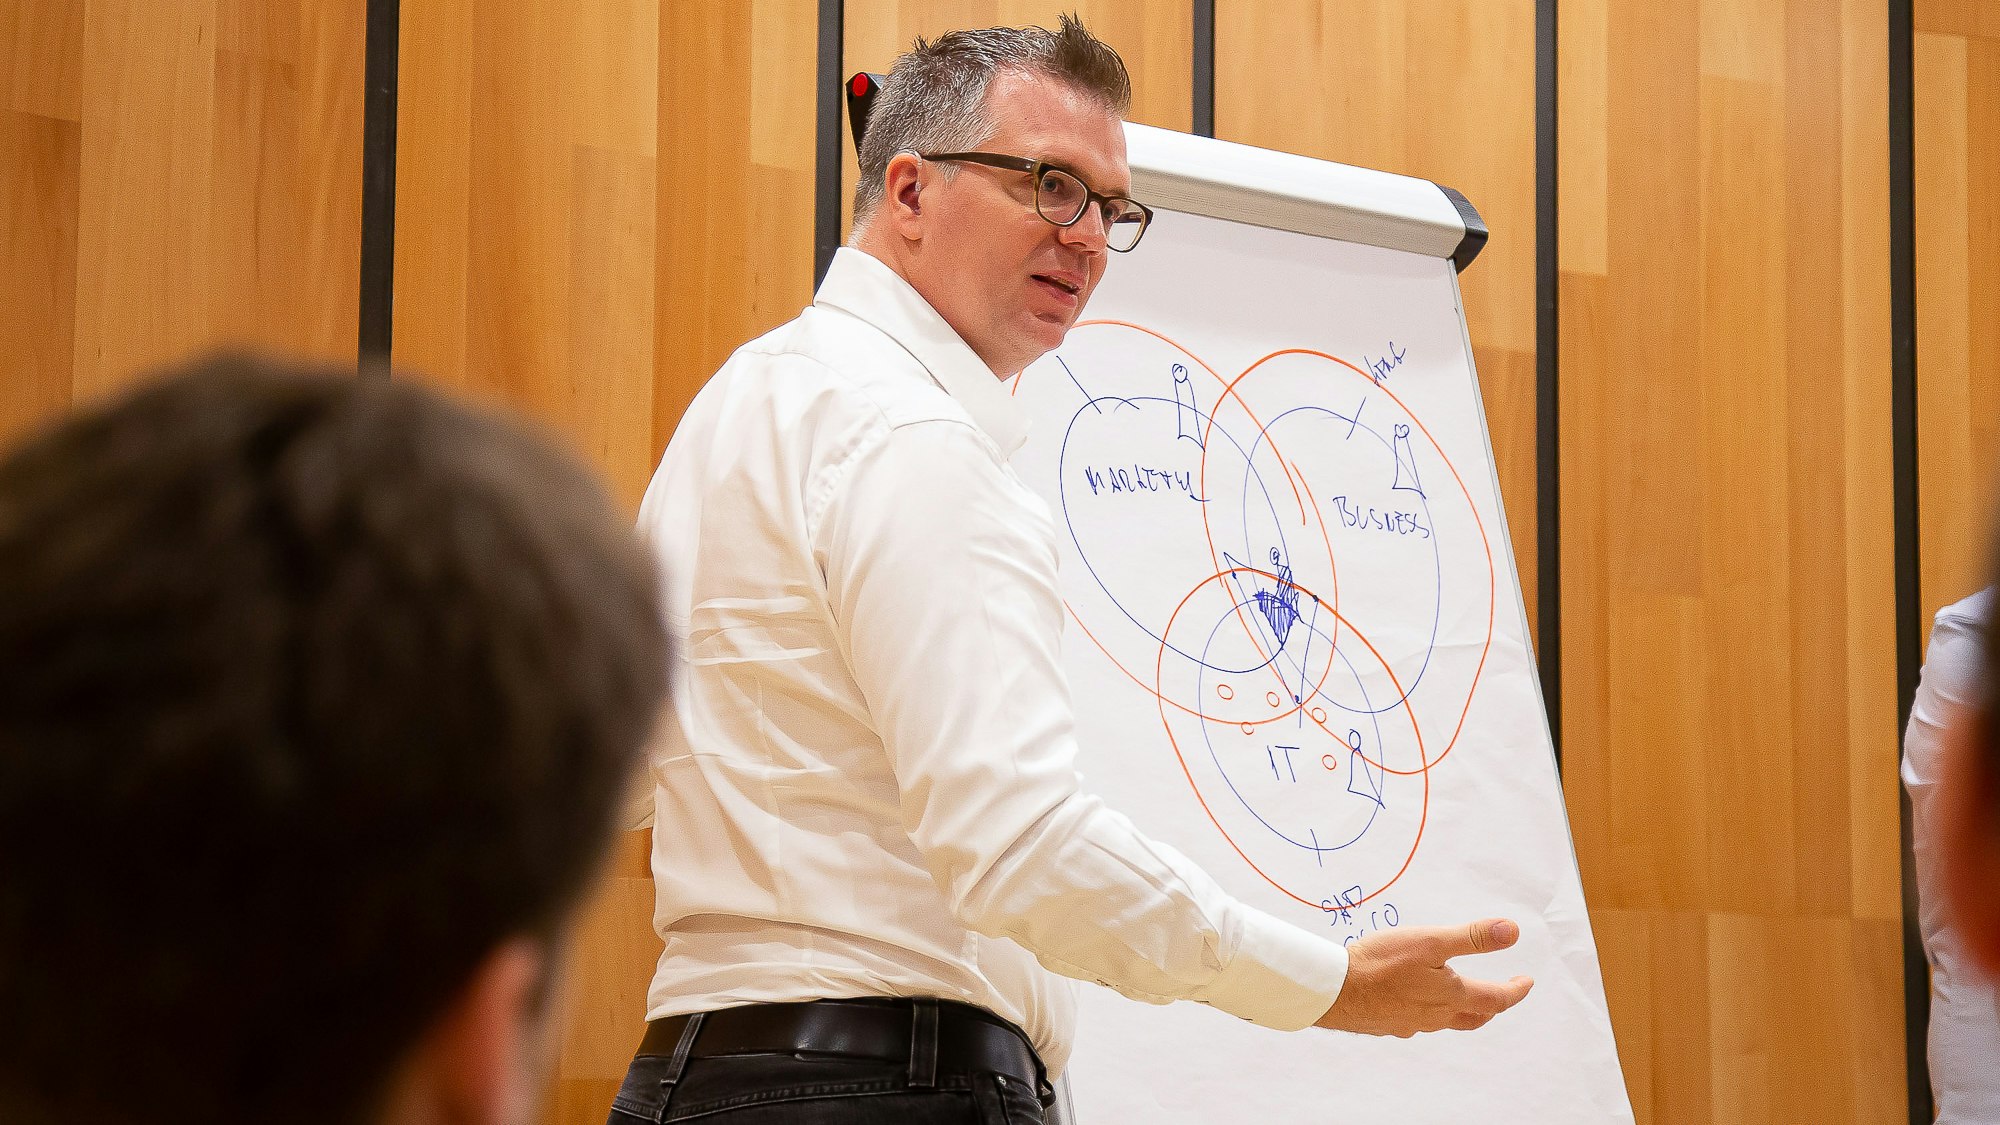 Jonathan Möller presenting to a group of people from a flipchart